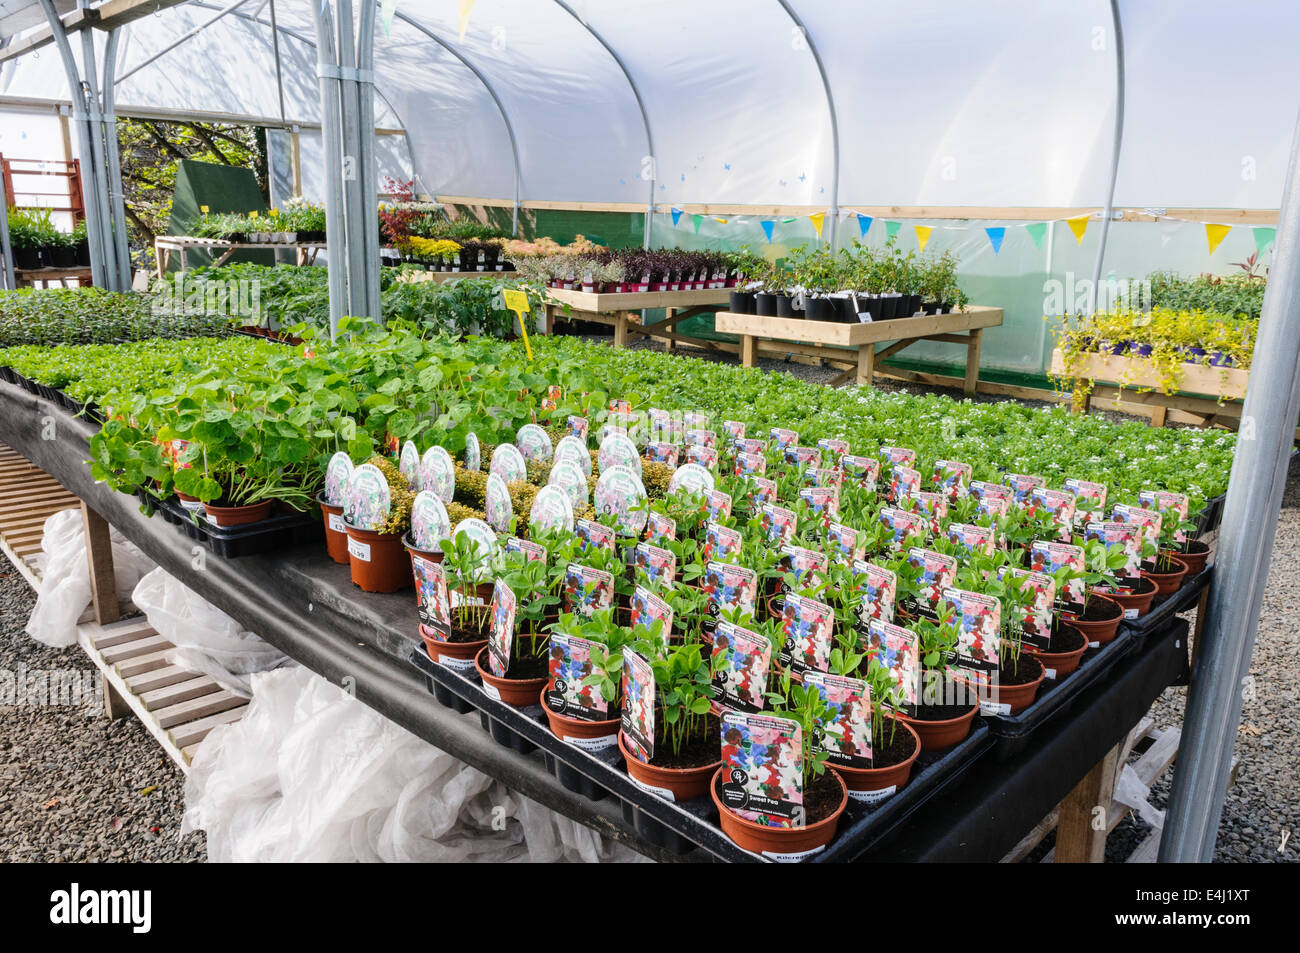 Lots of Surfina plants for sale in a polytunnel greenhouse. Stock Photo